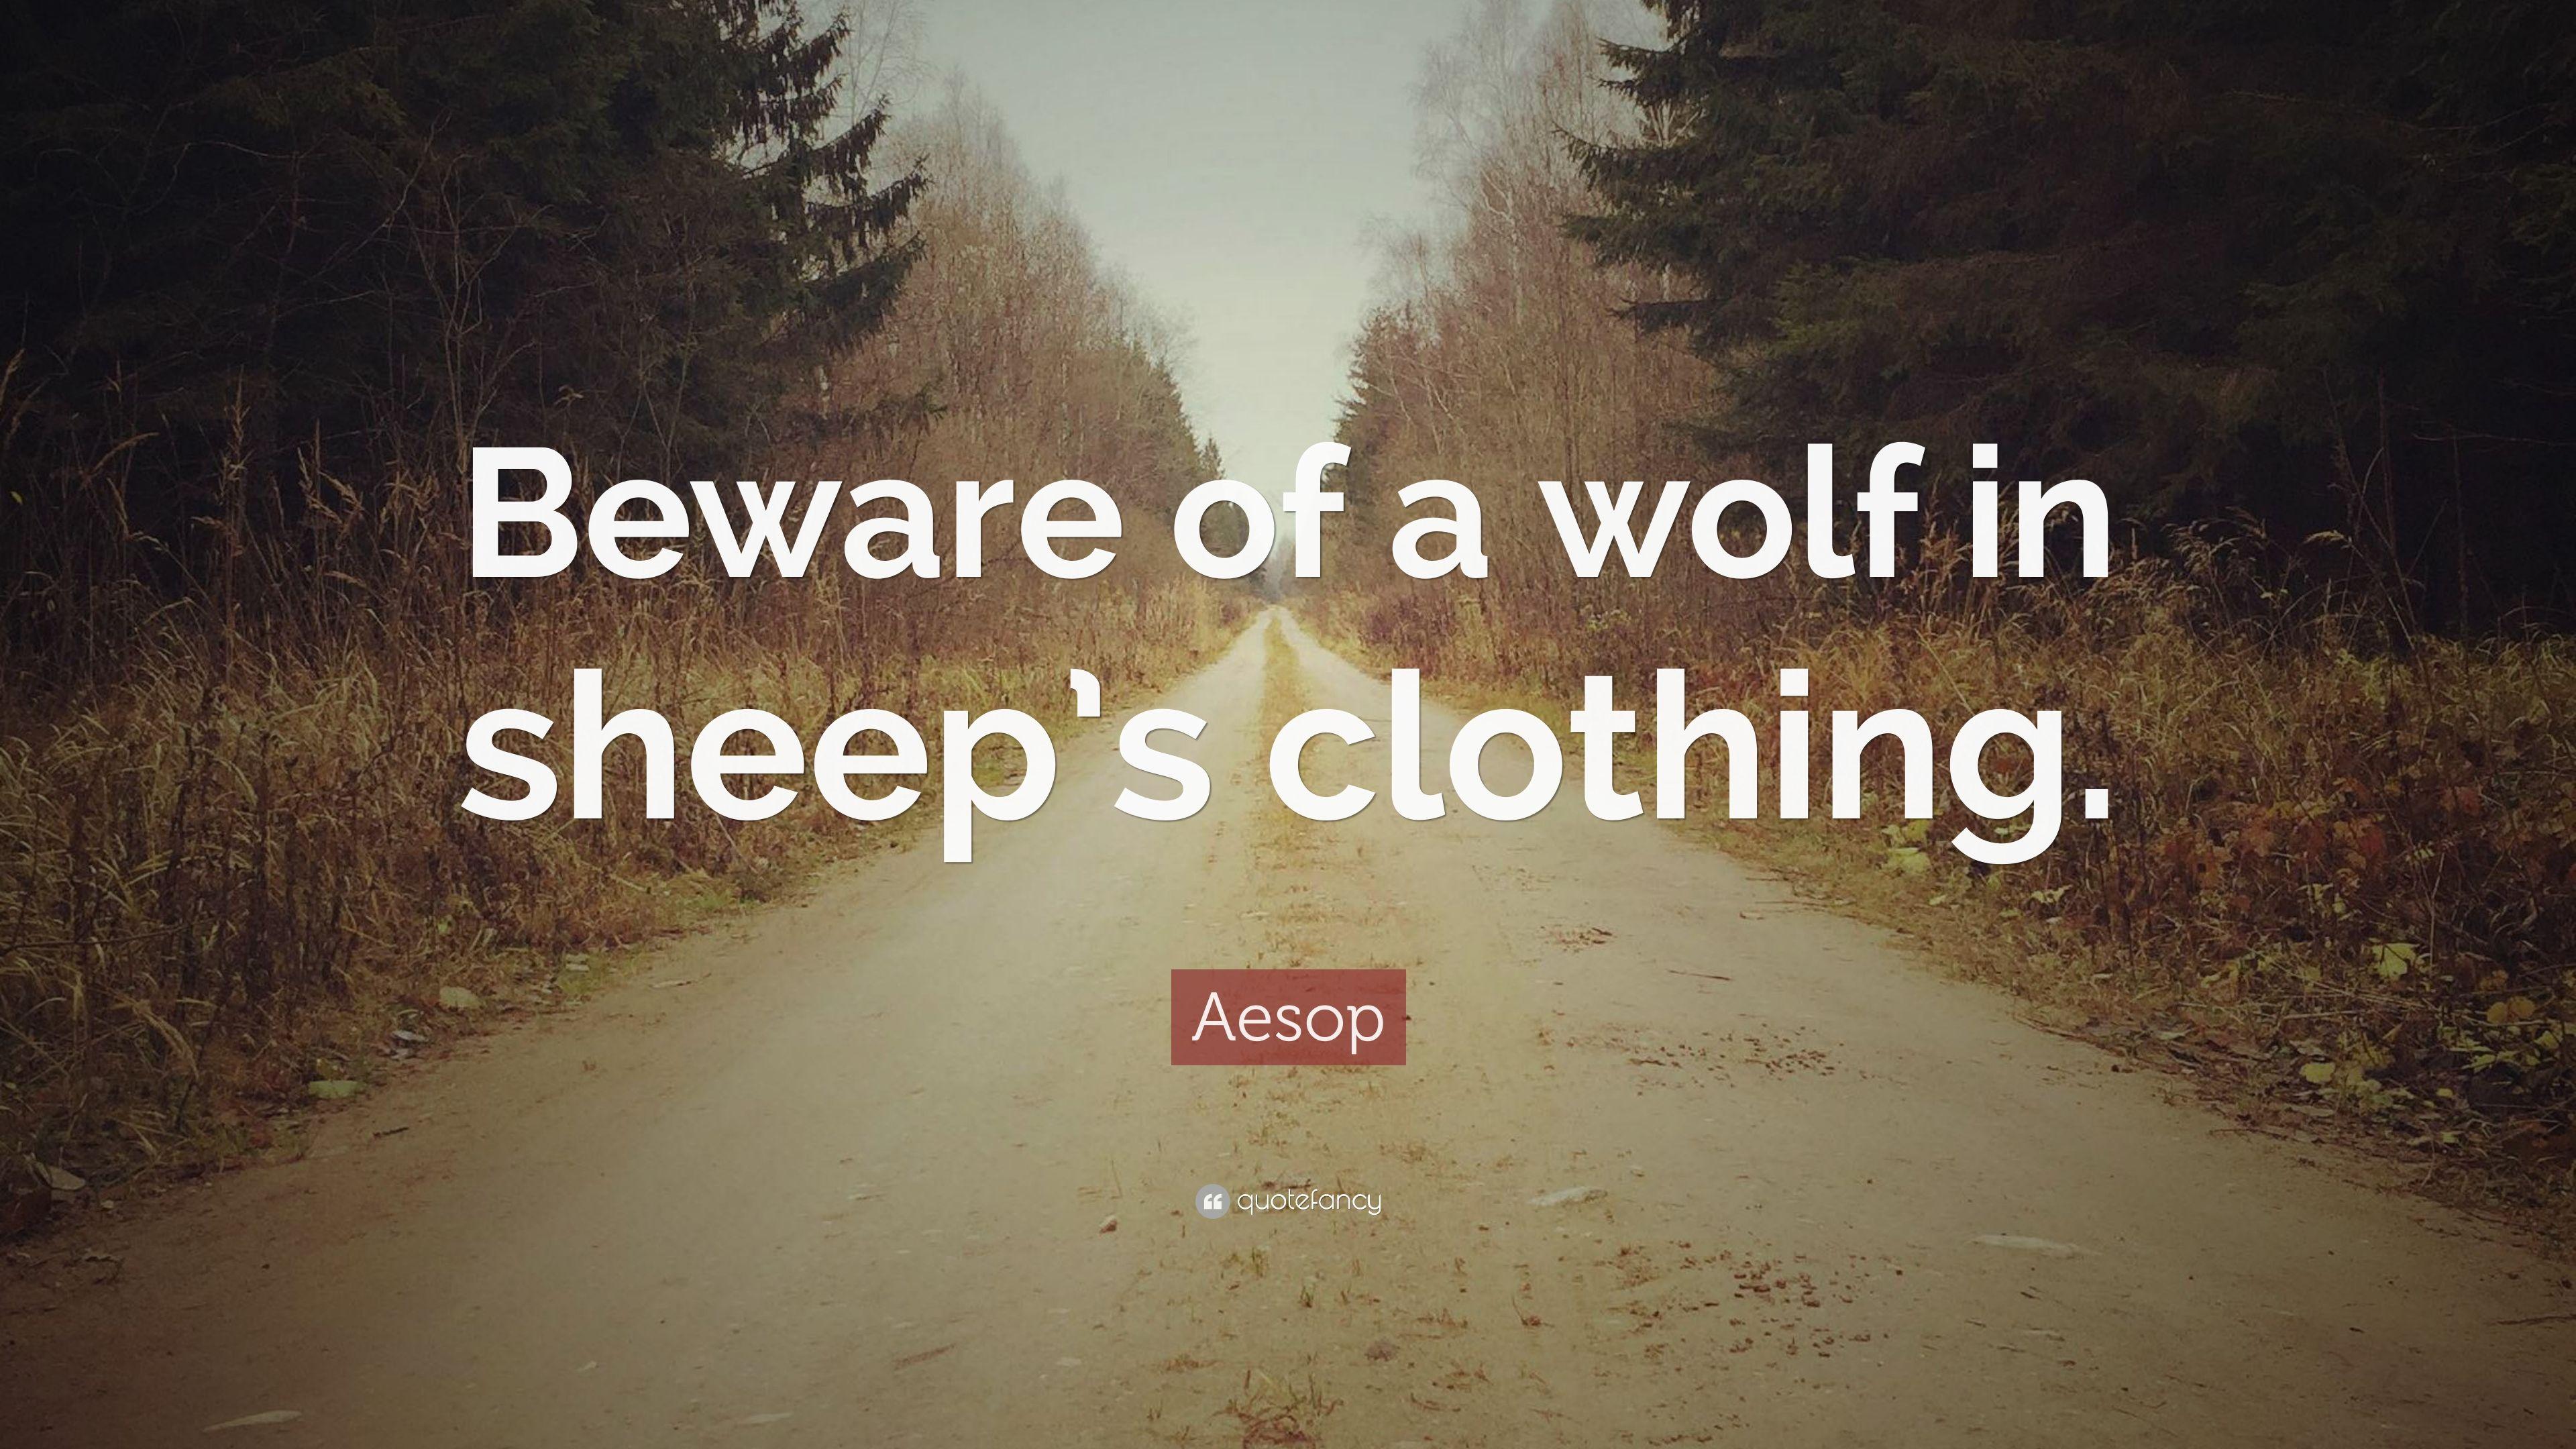 Aesop Quote: “Beware of a wolf in sheep's clothing.” 10 wallpaper